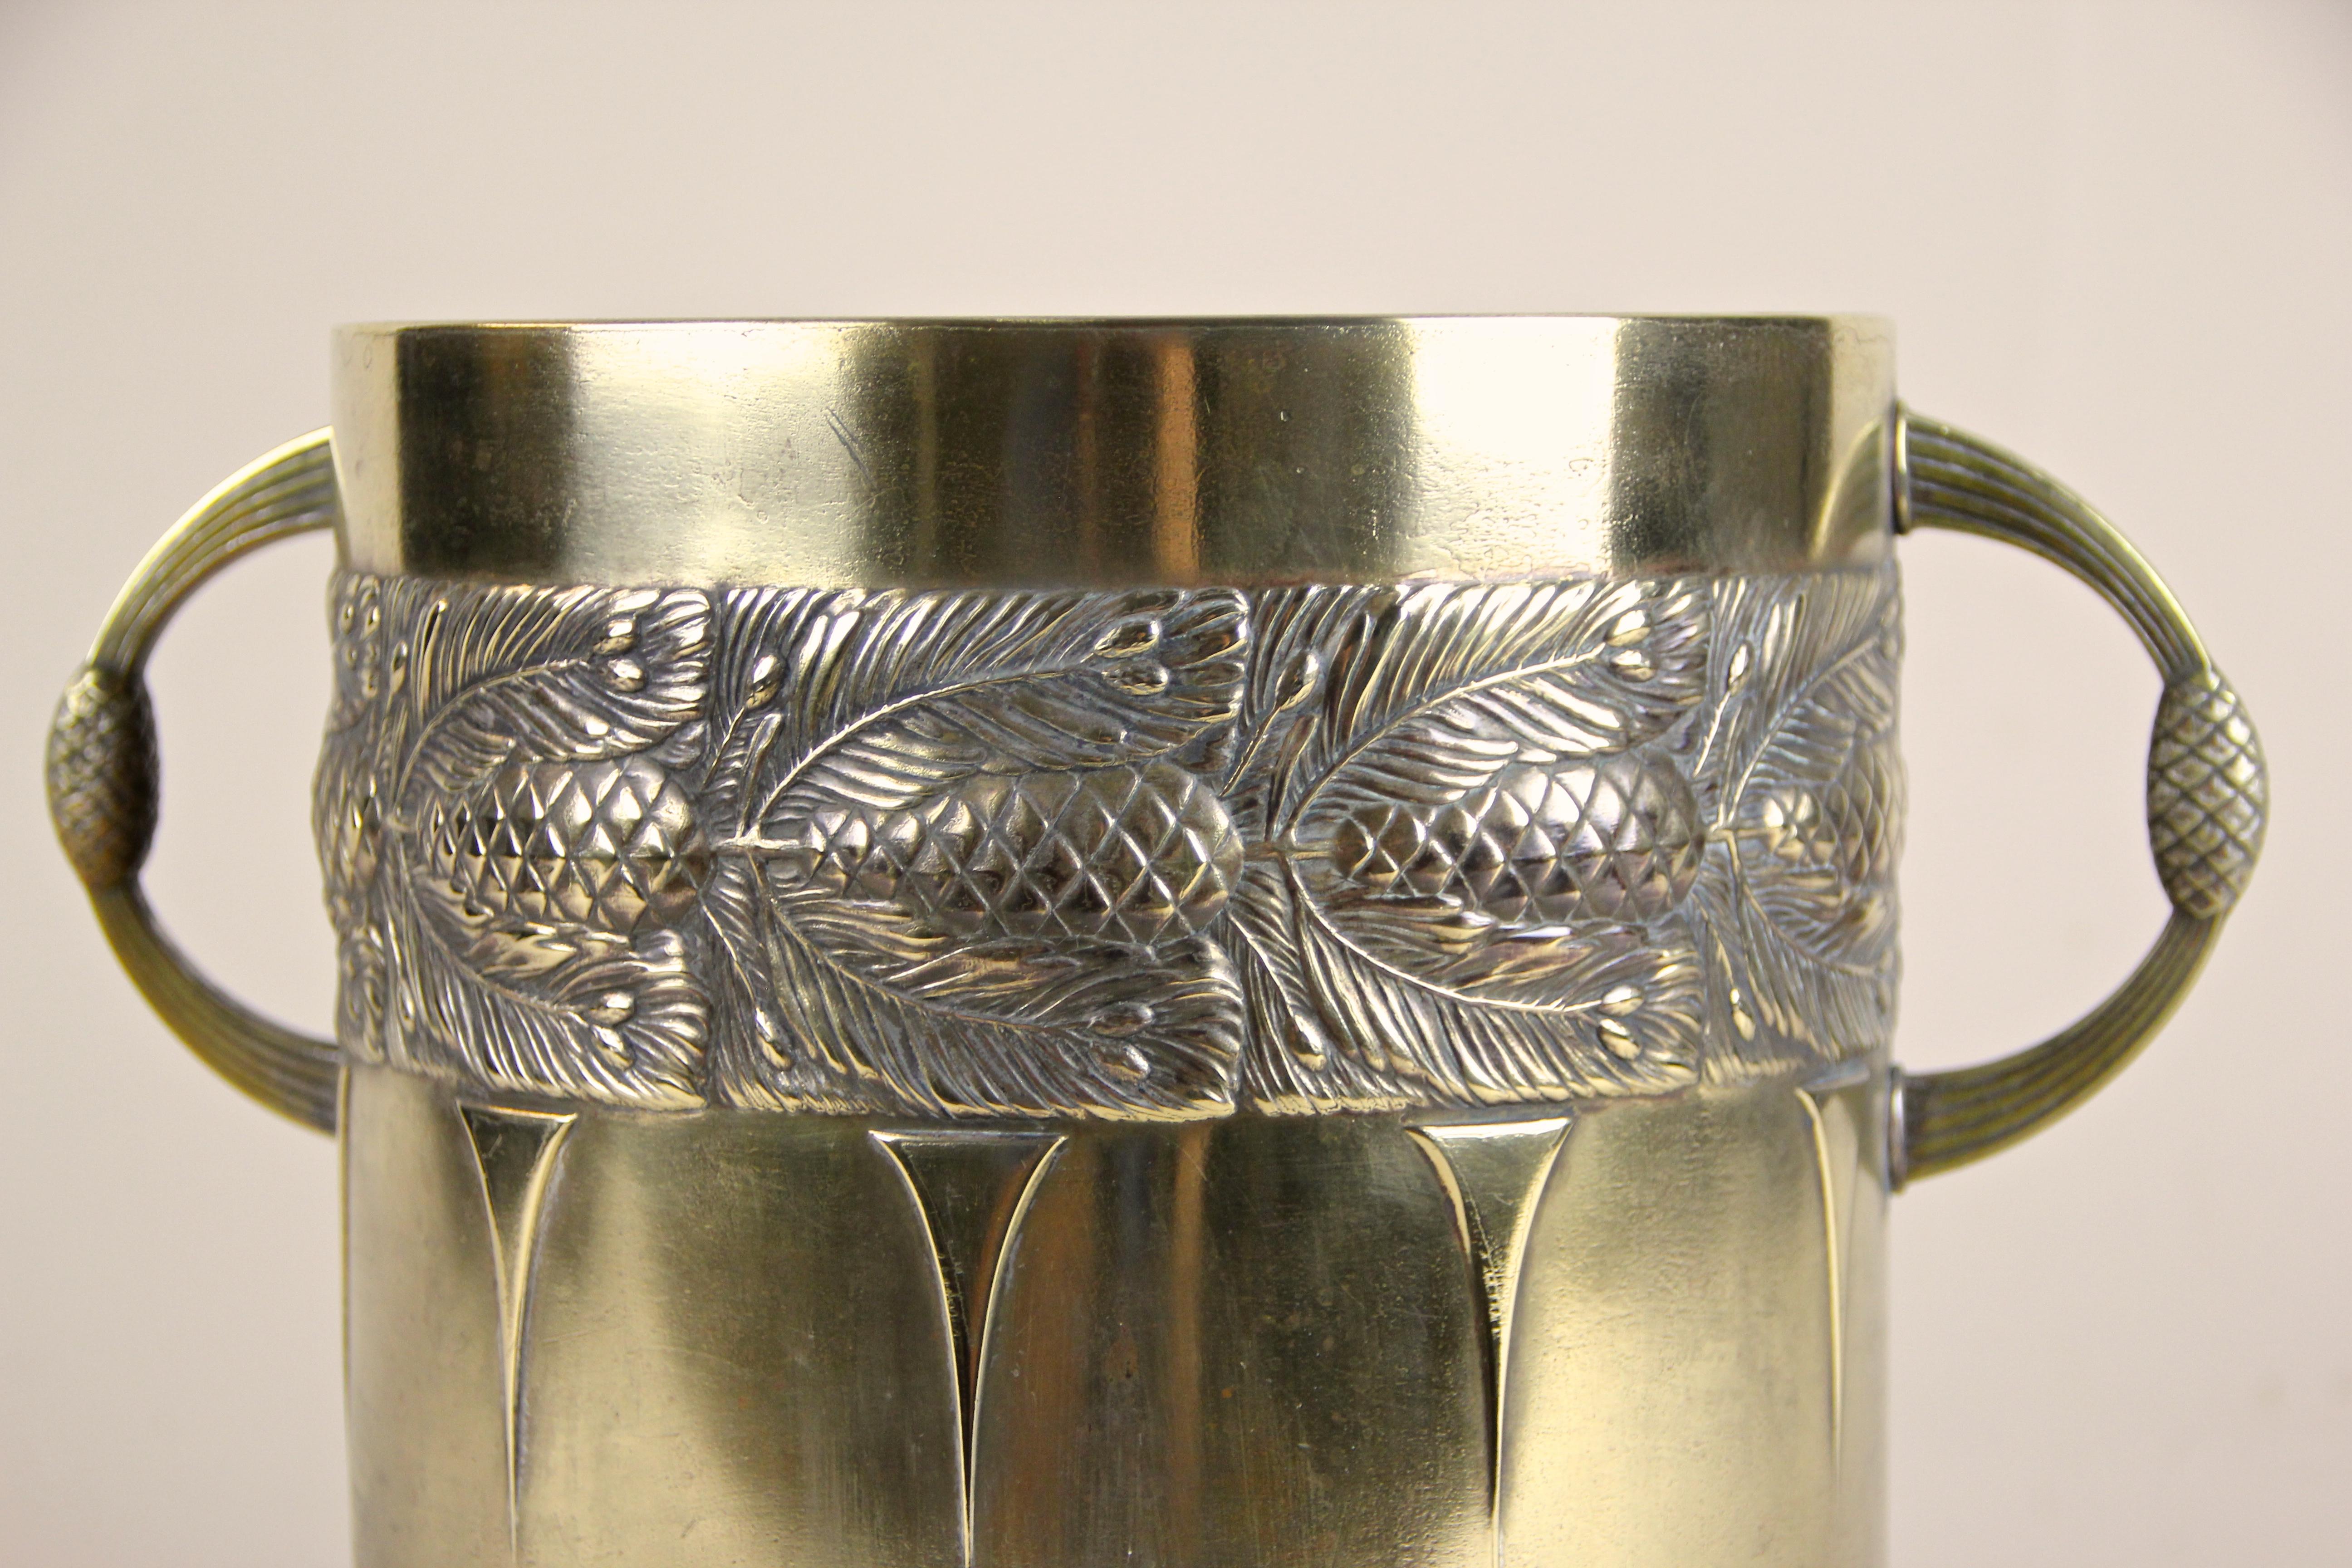 Brass wine cooler or cachepot artfully made by the famous company of WMF from the Art Nouveauperiod in Germany, circa 1915. The great shaped brass bottle holder shows a beautiful embossed design with pinecones and lovely made handles. It can be used